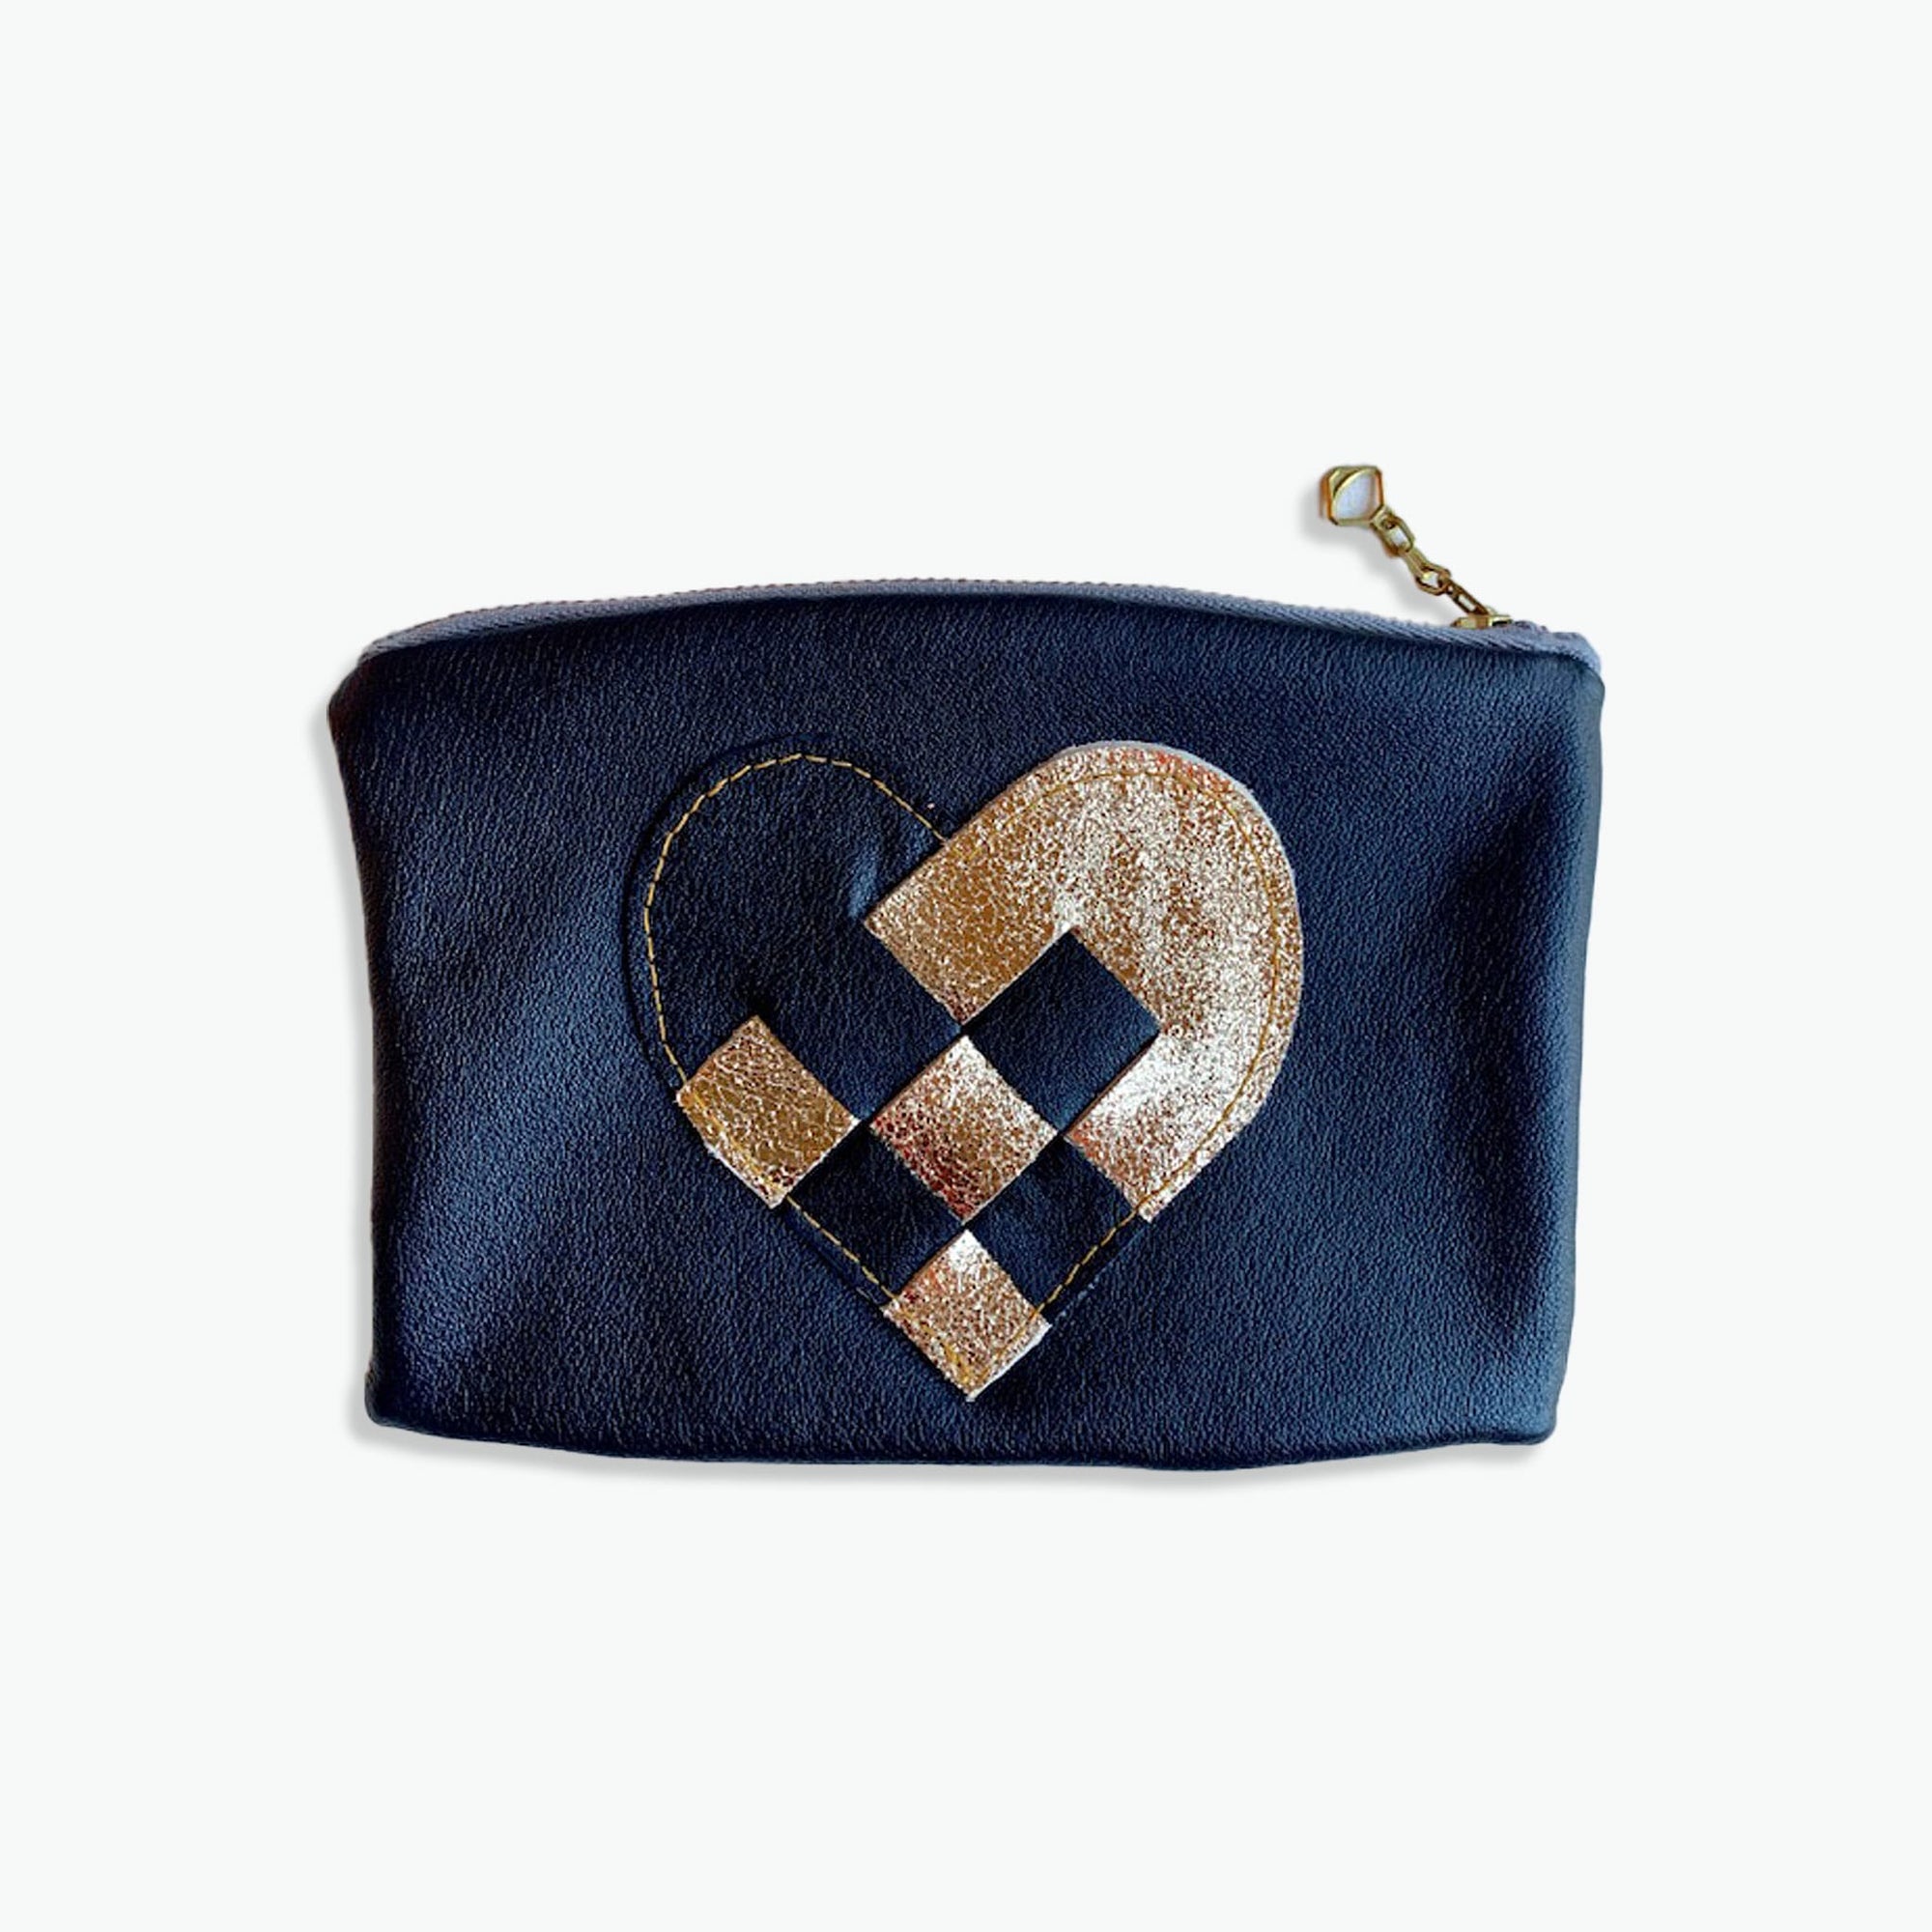 Recycled Leather Pouch black gold Heart